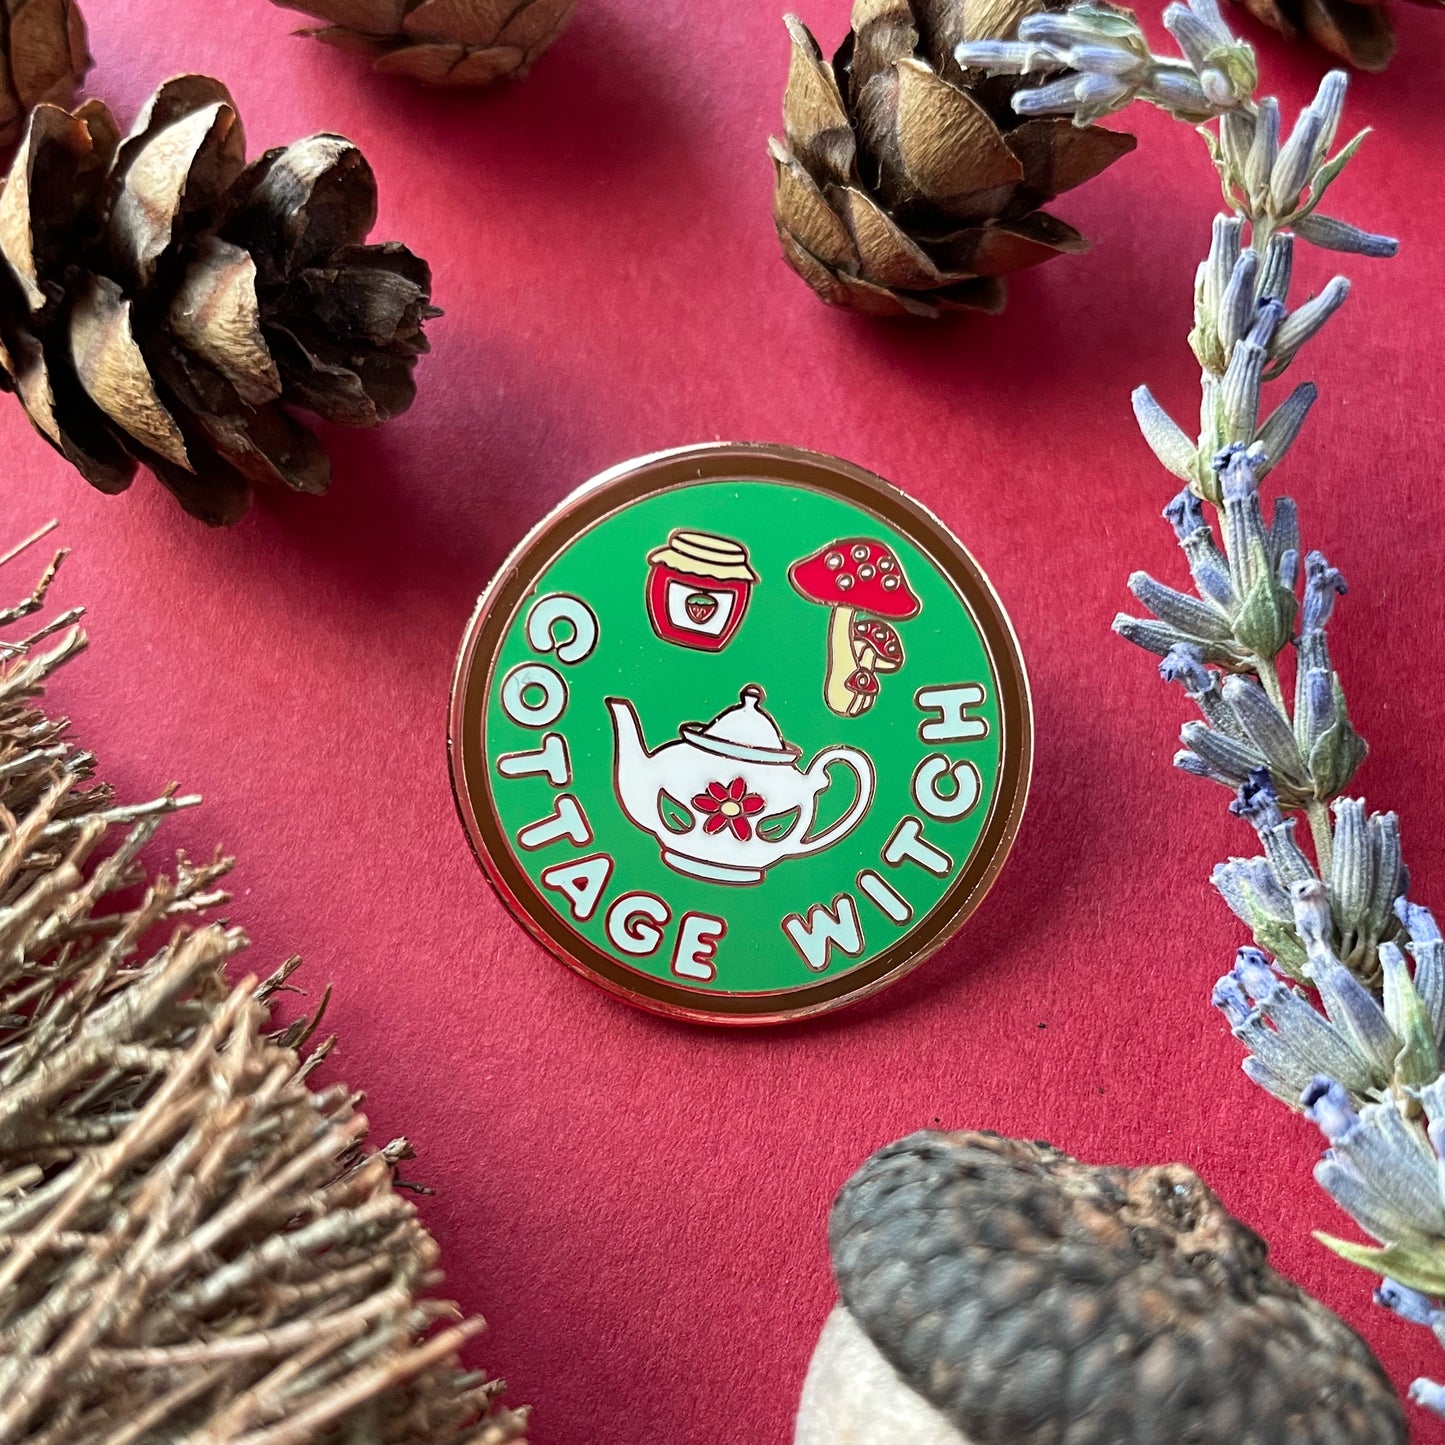 A circular enamel pin on a red background surrounded by small pine cones, an acorn, broom bristles, and a lavender sprig.